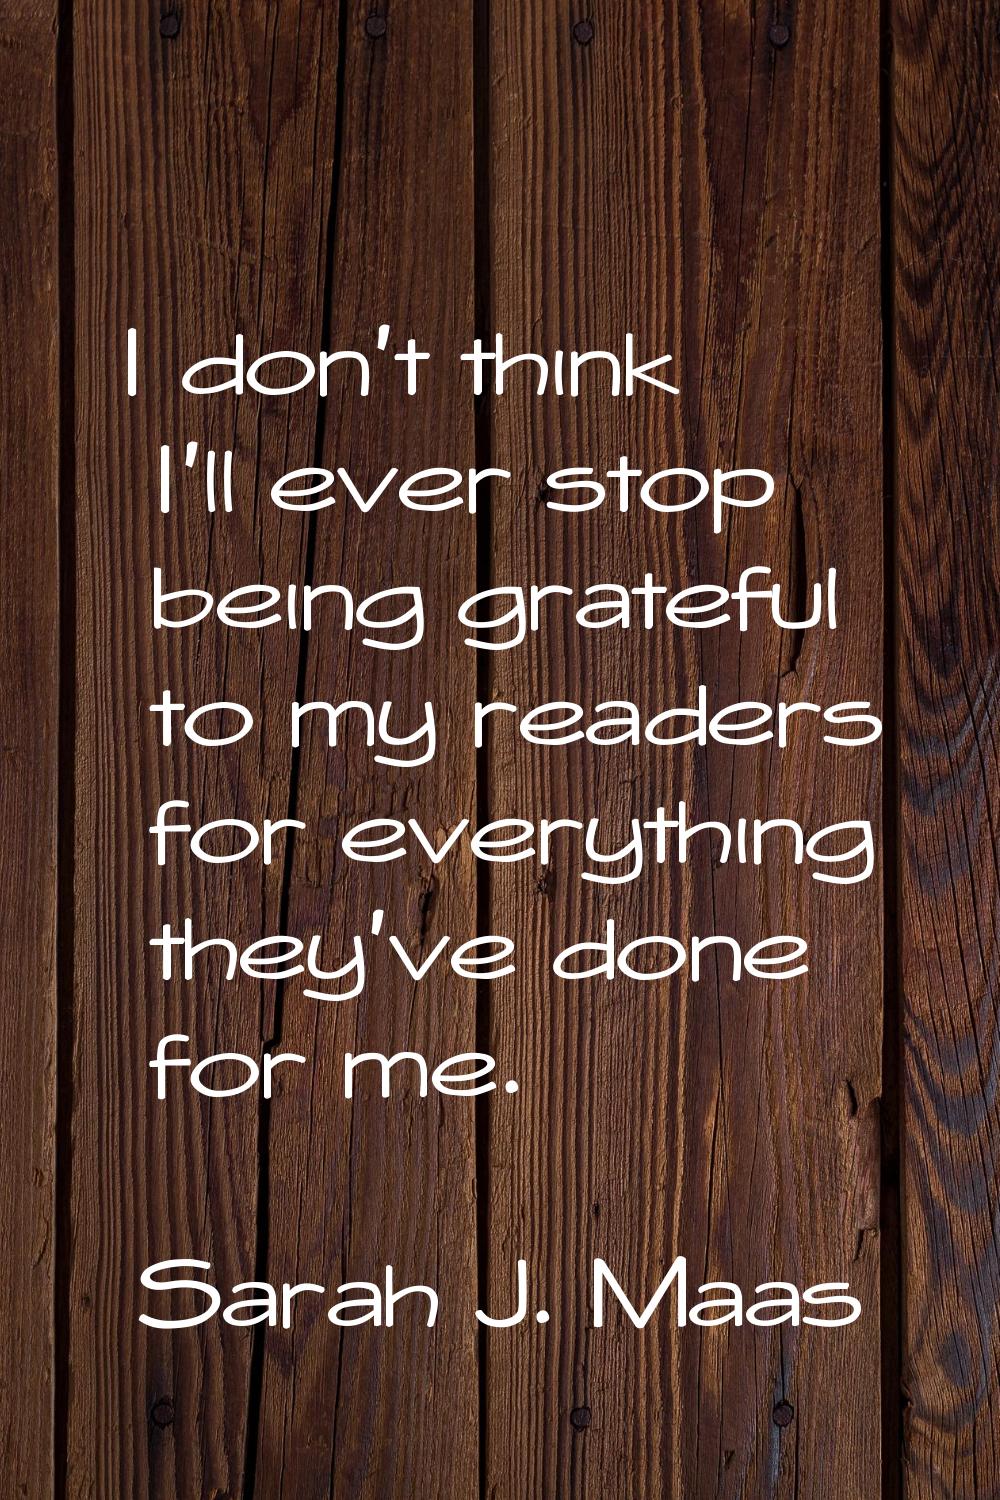 I don't think I'll ever stop being grateful to my readers for everything they've done for me.